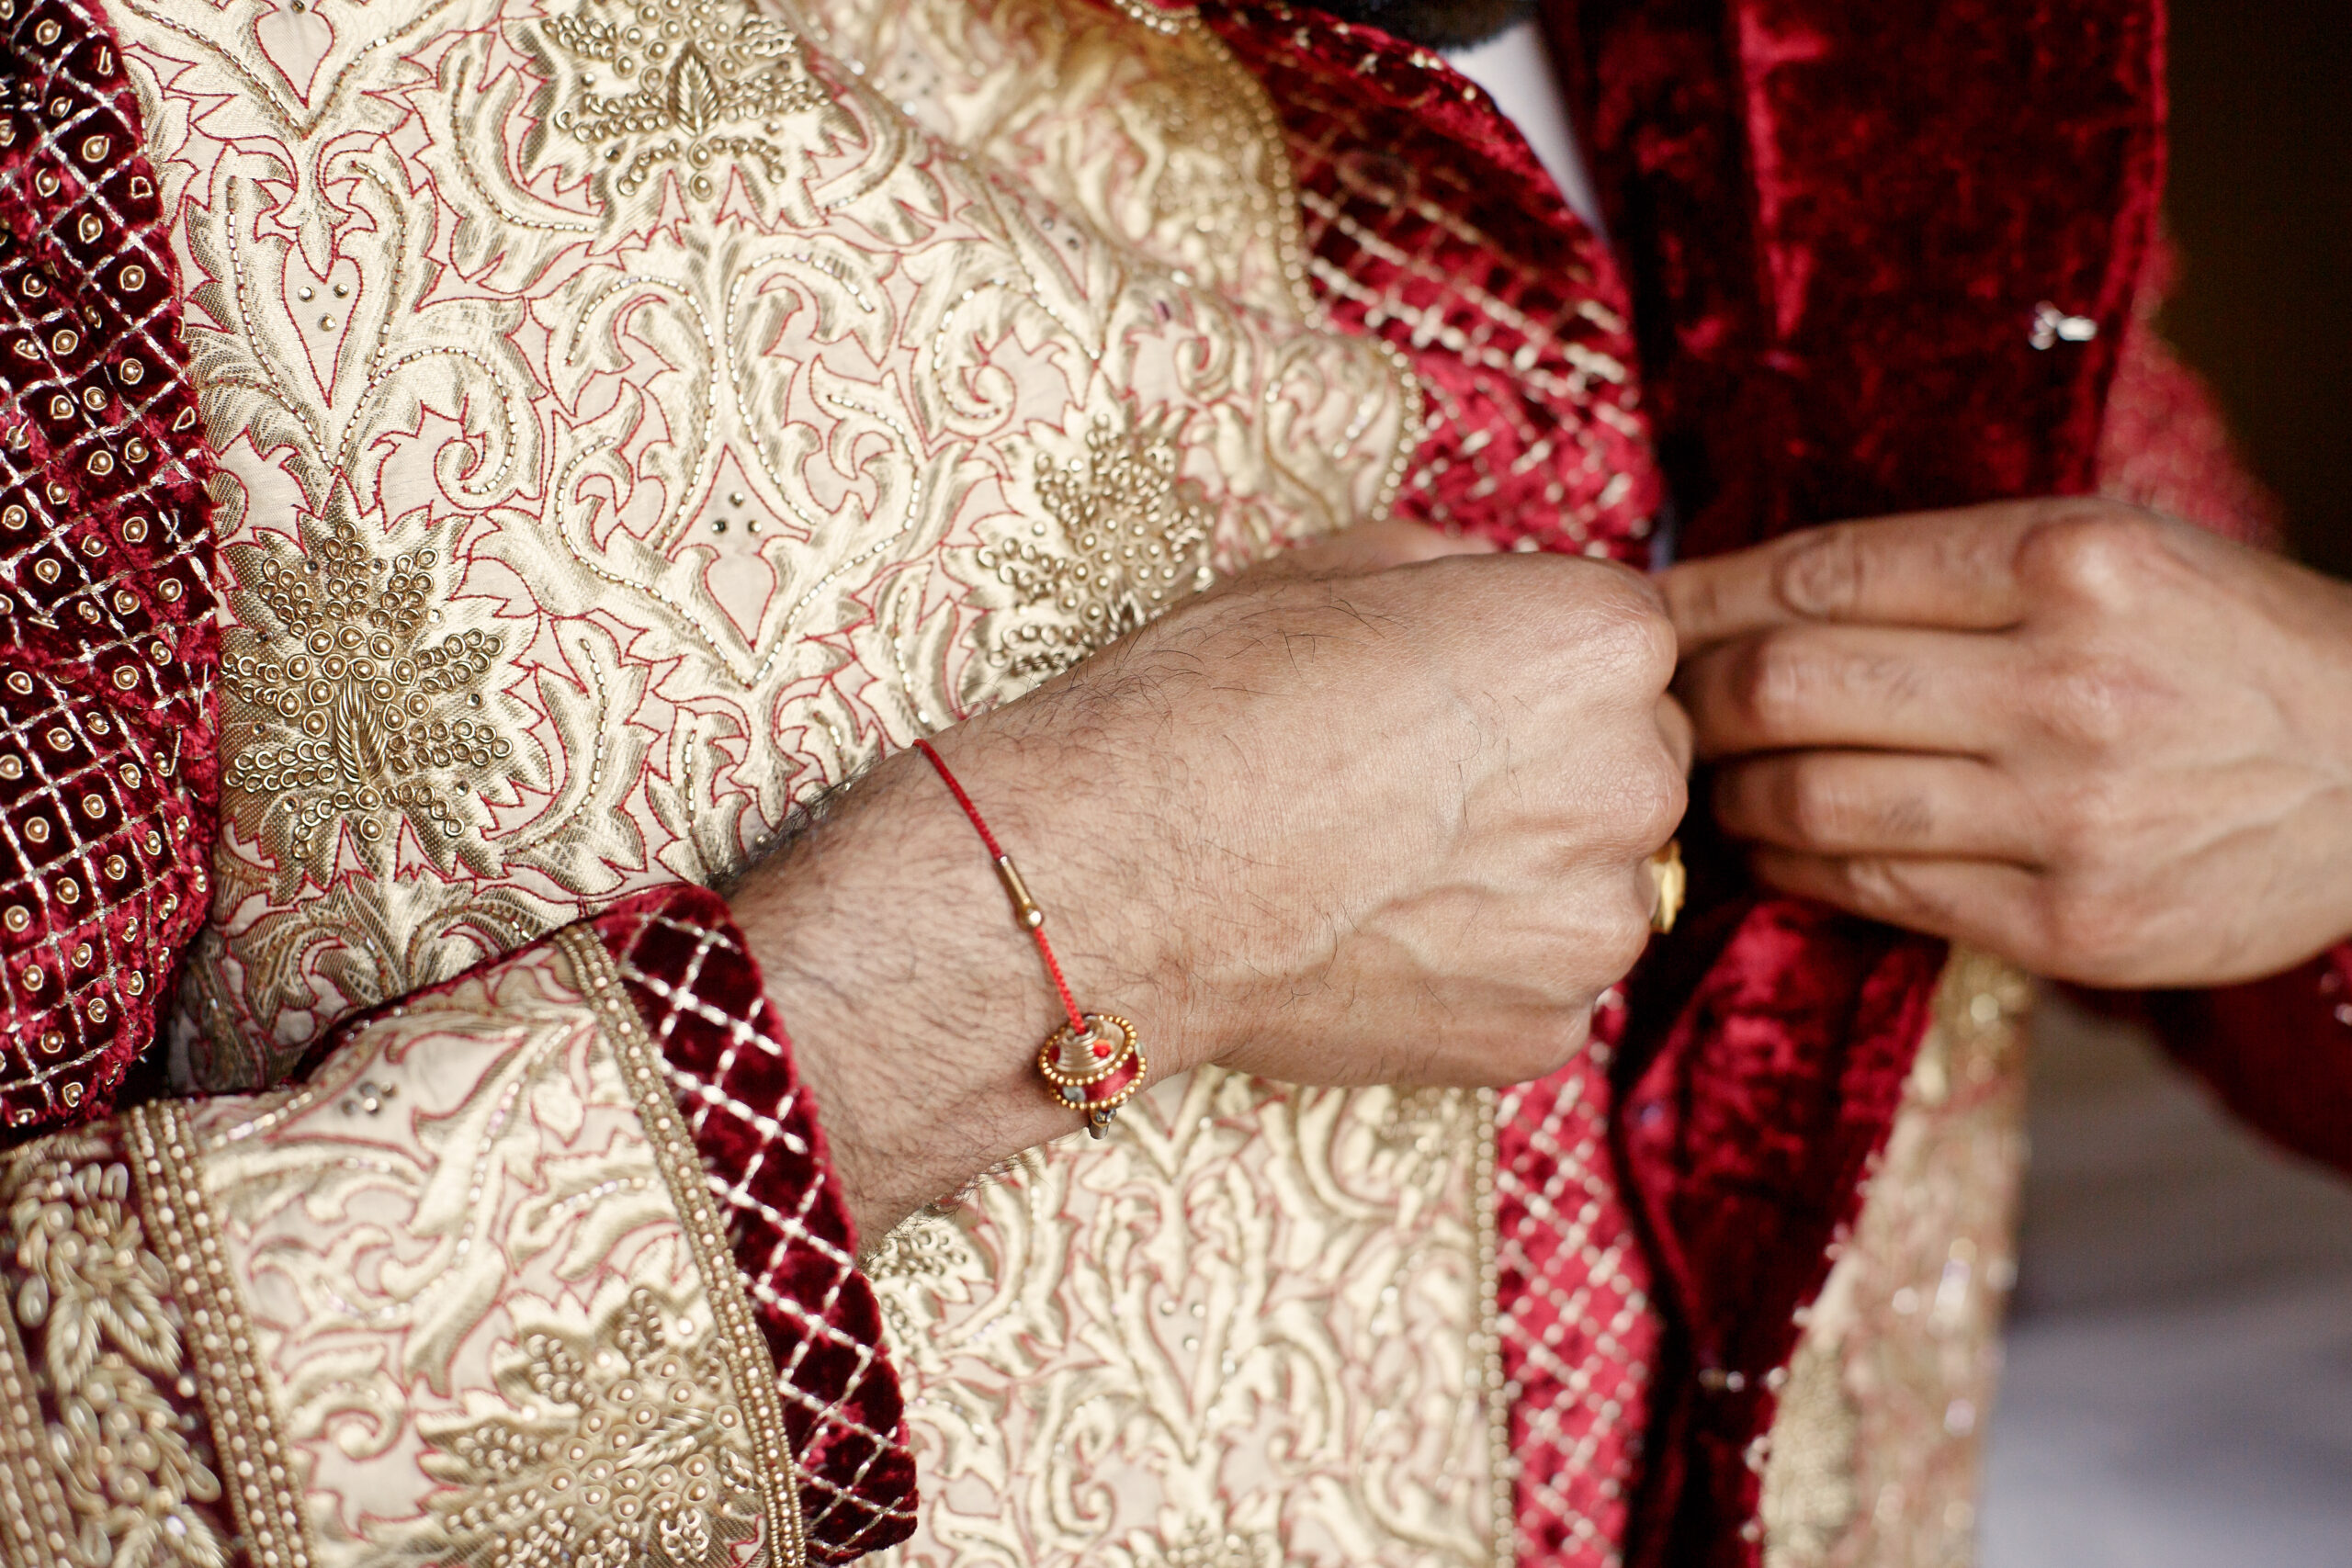 Groom's arms with red bracelet button up golden wedding suit